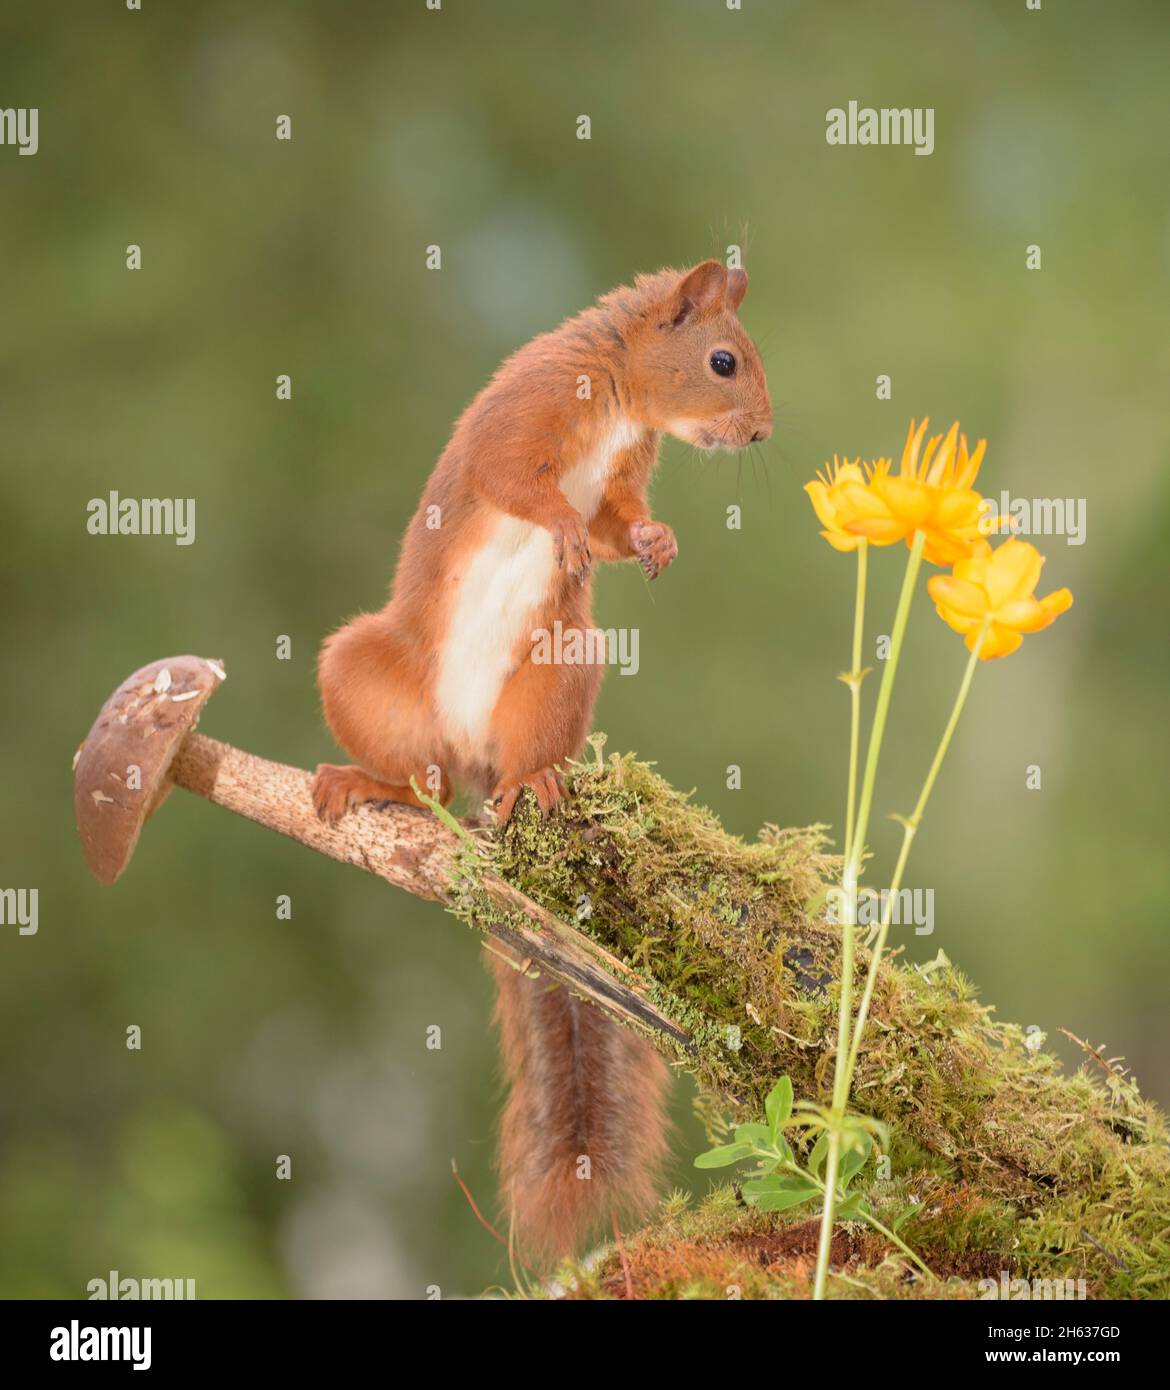 red squirrel standing on a mushroom with yellow globeflowers Stock Photo